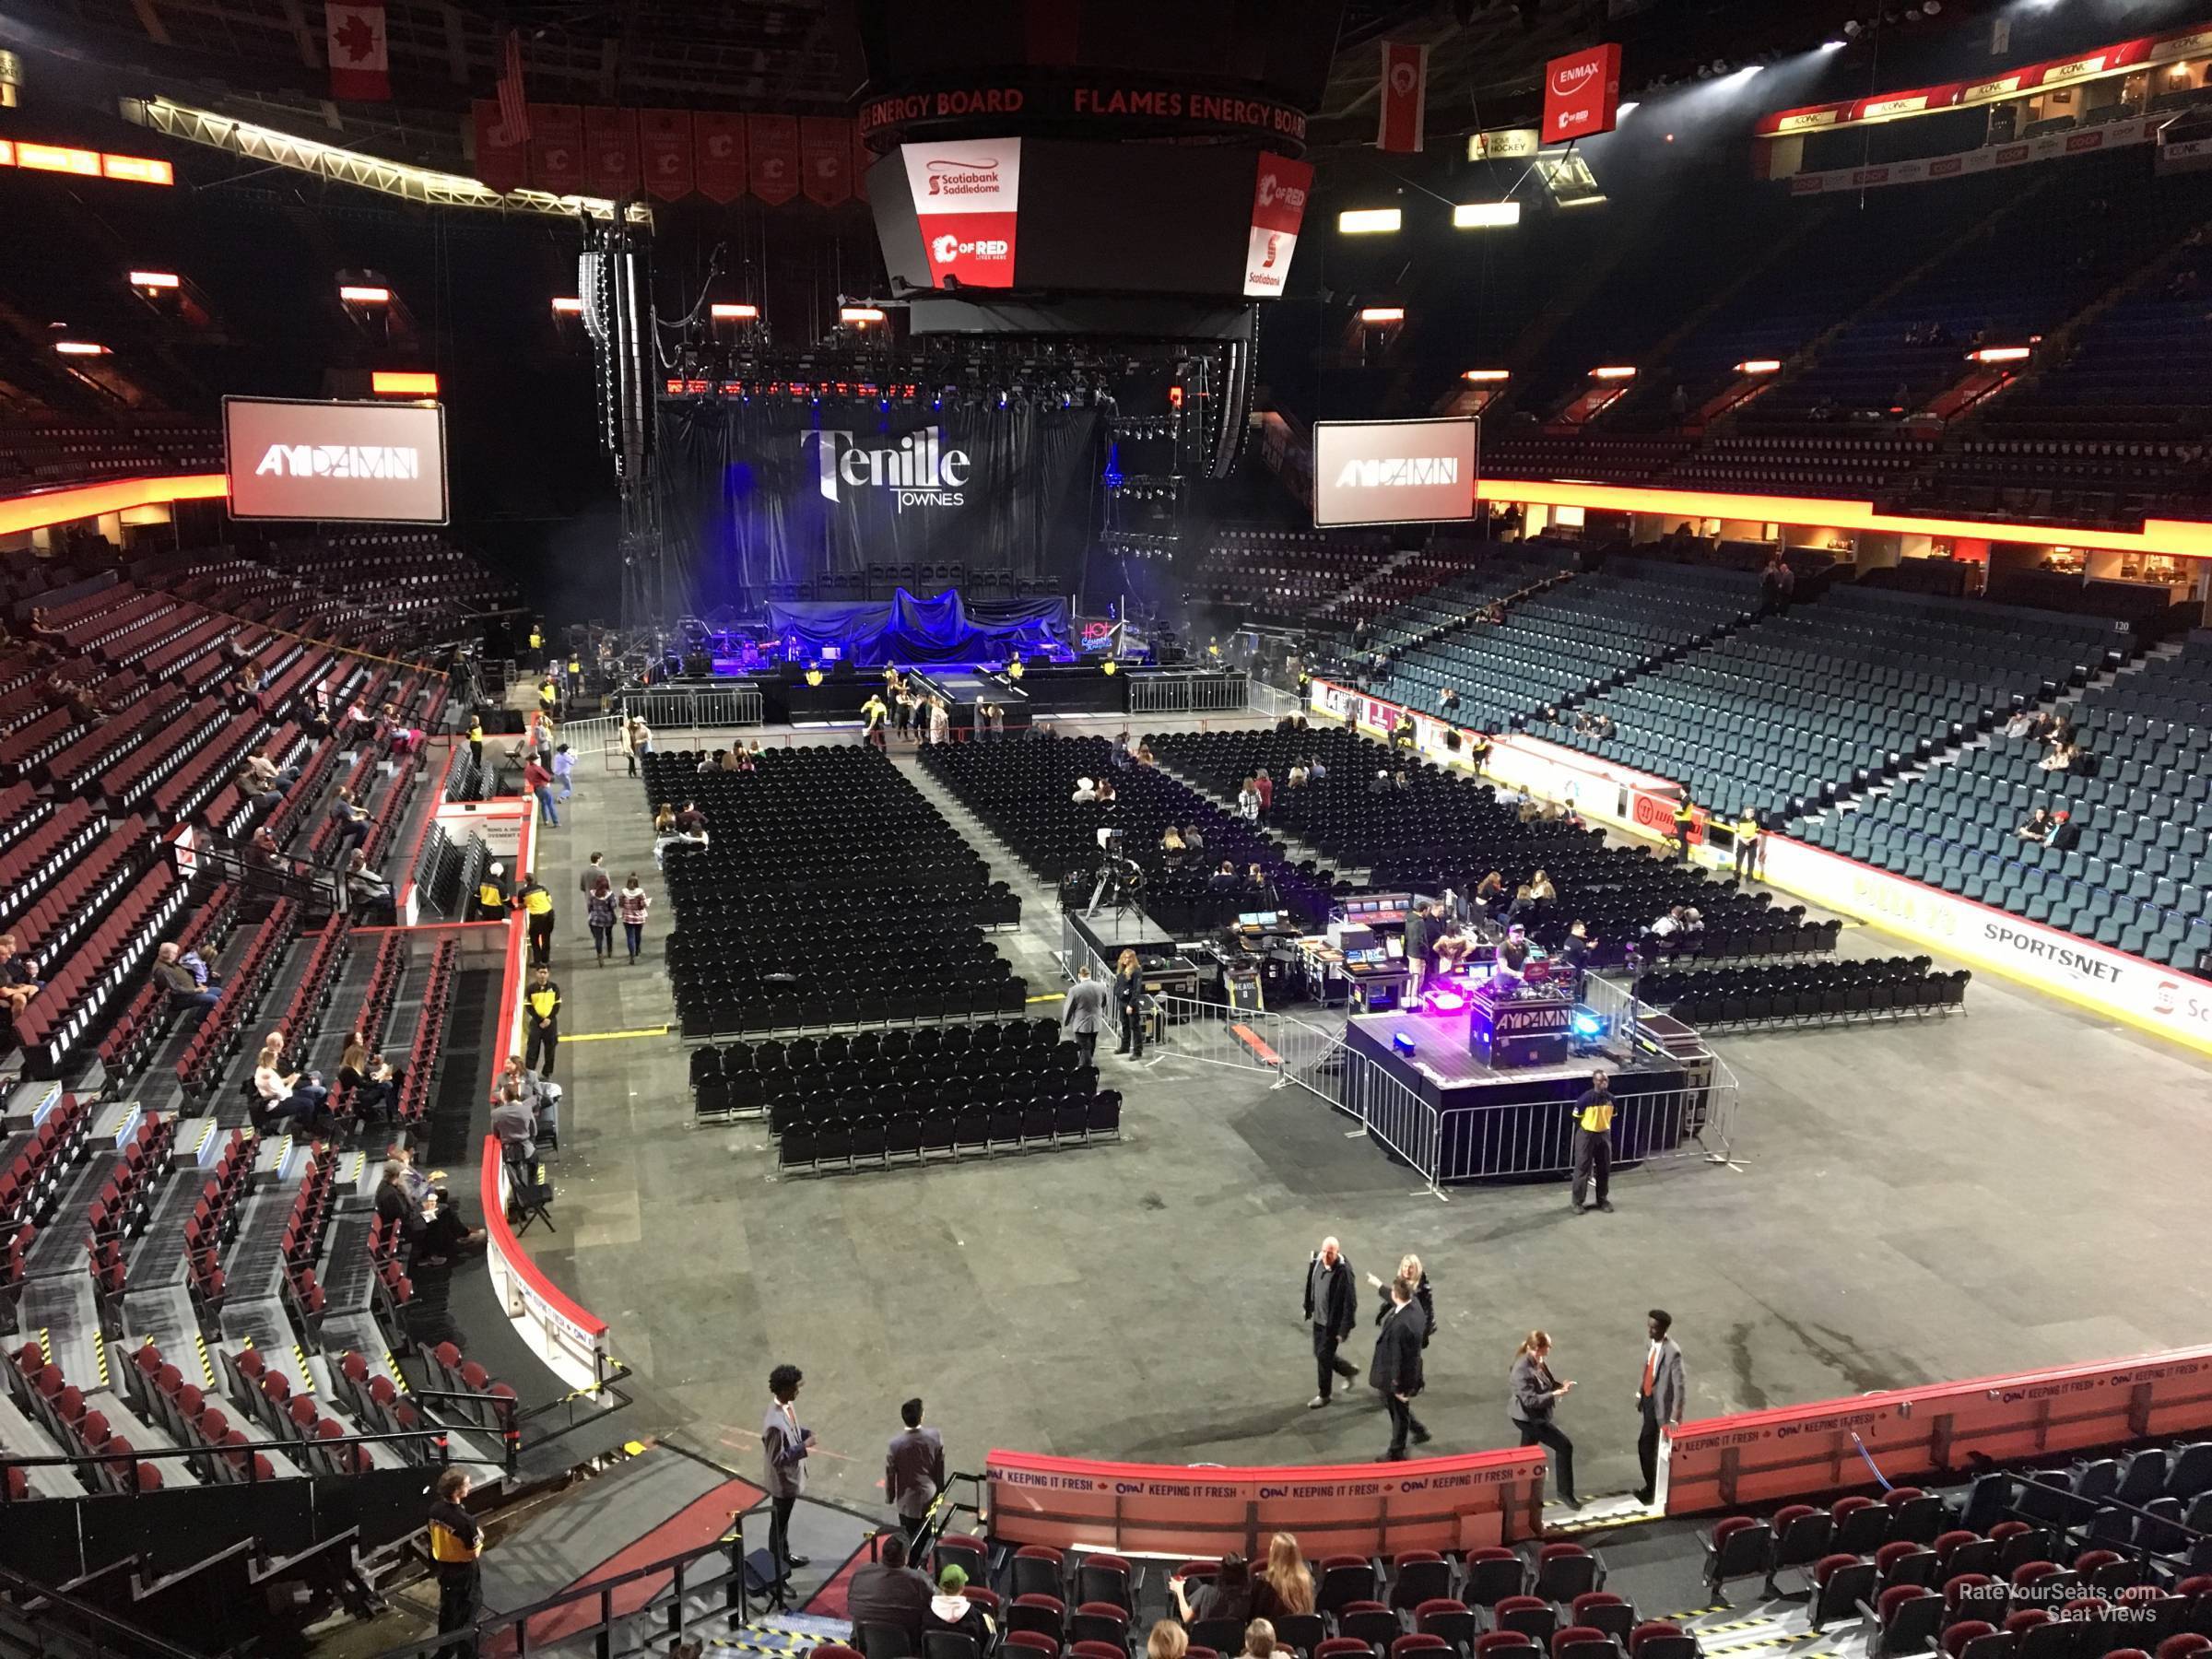 section 218, row 5 seat view  for concert - scotiabank saddledome